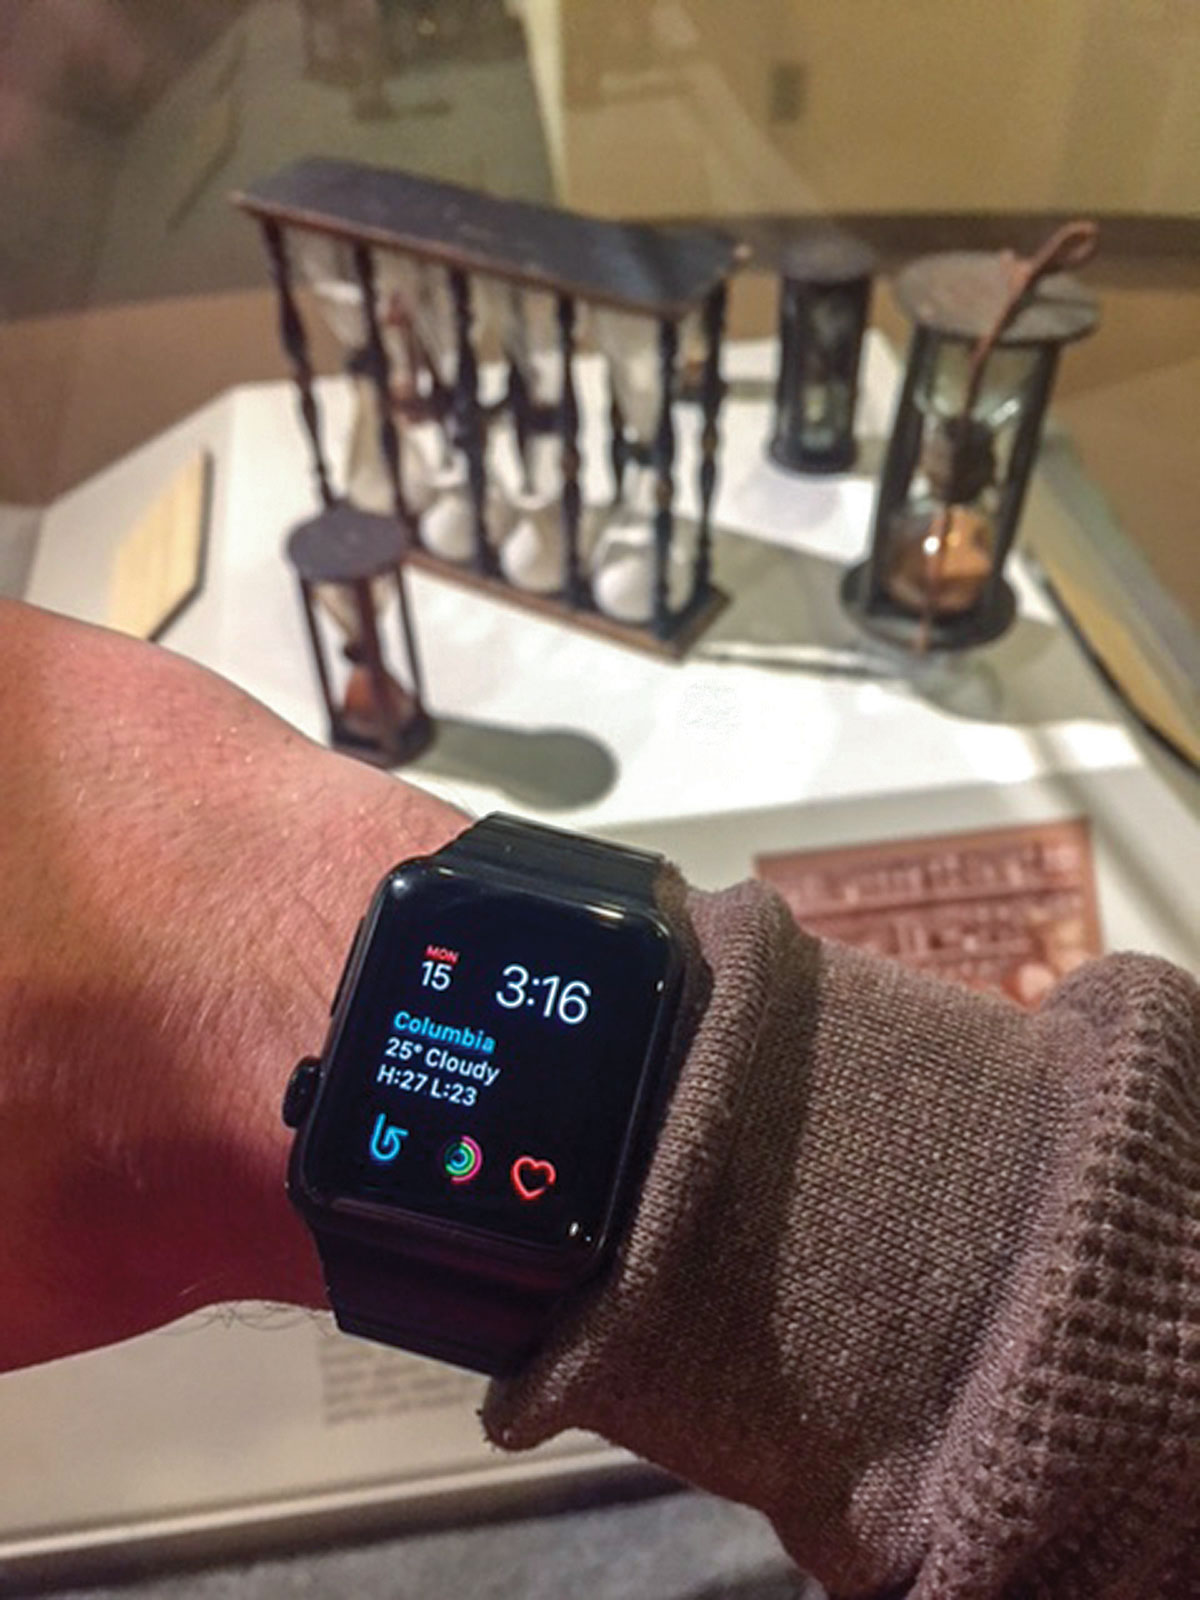 First Generation Apple Watch with hourglasses in background at the National Watch & Clock Museum.